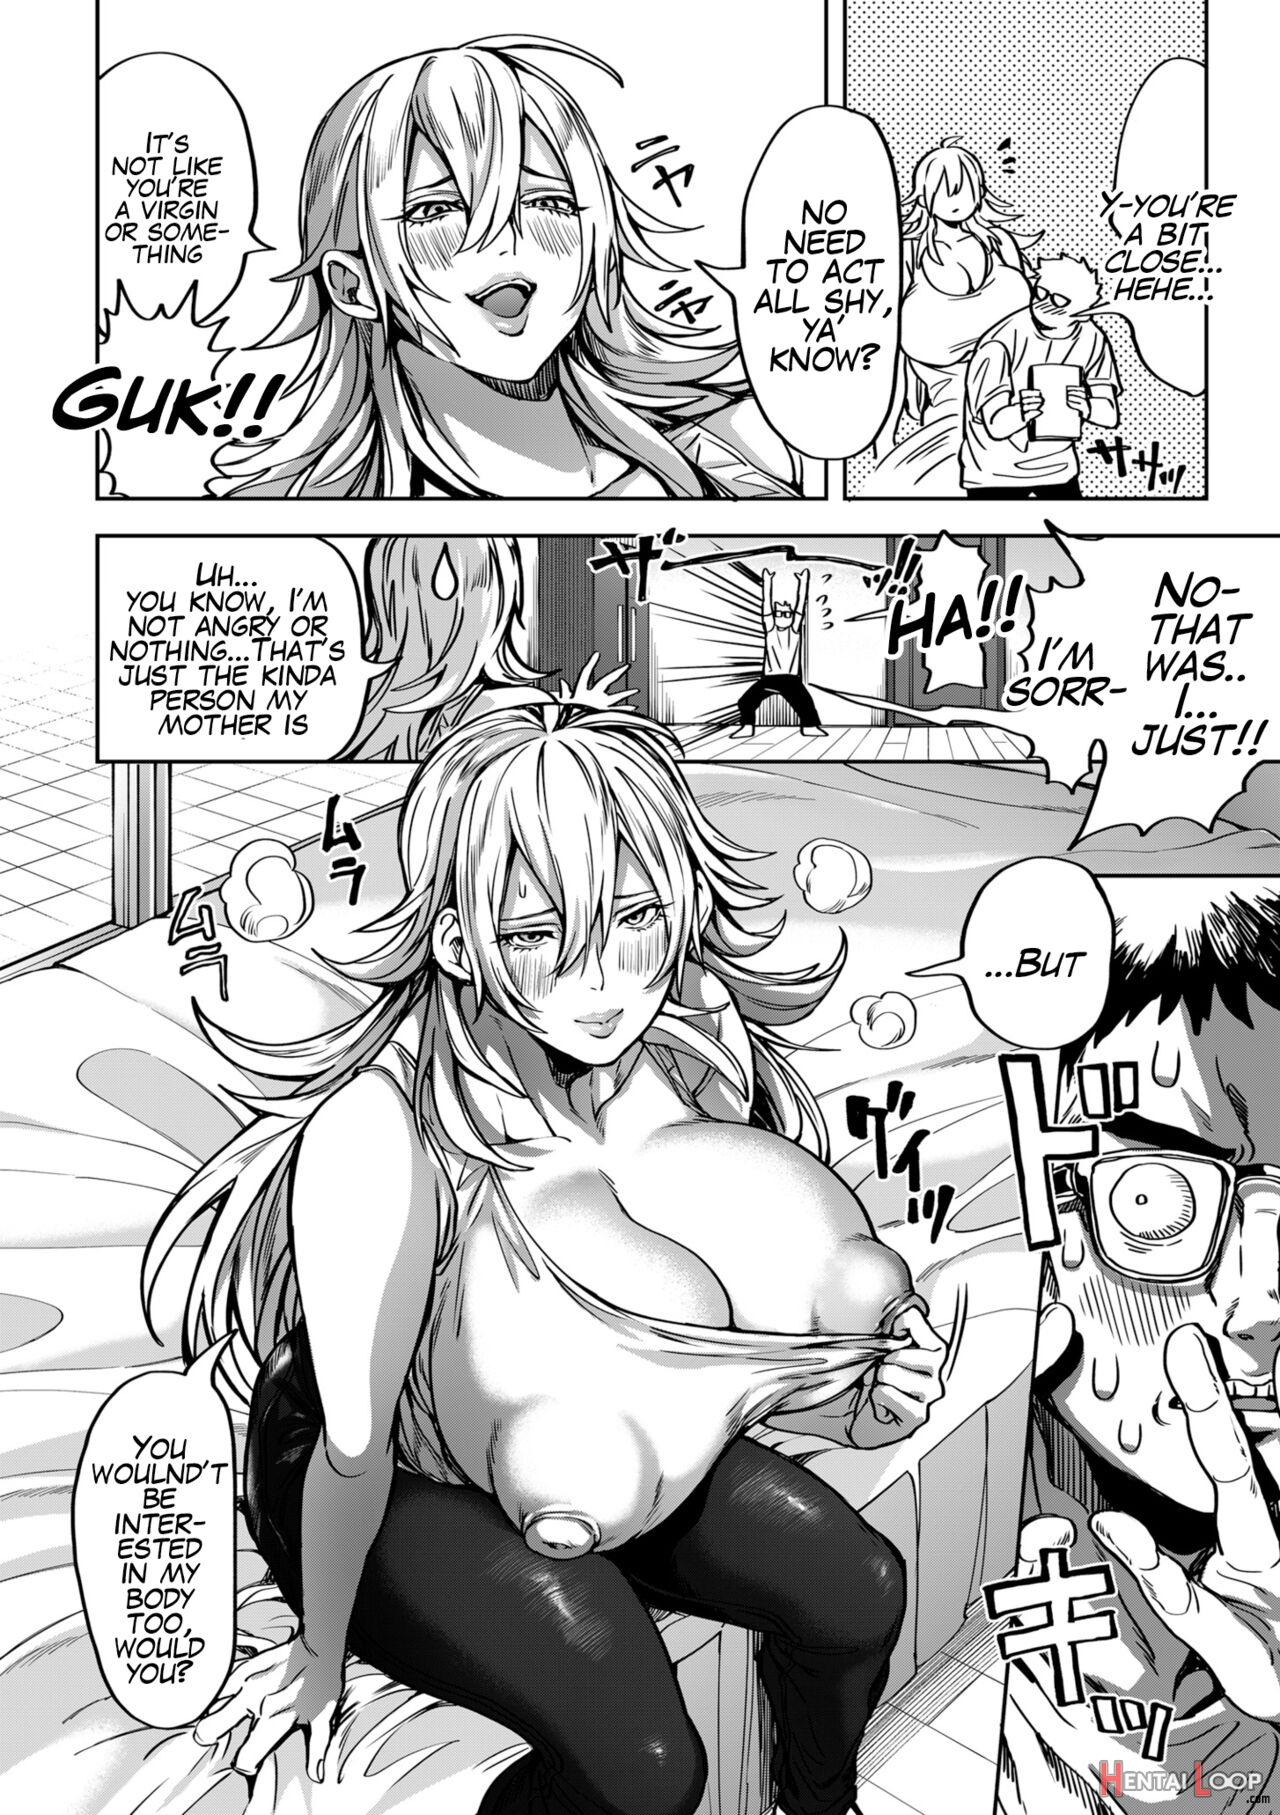 A Harem Paradise For All Seasons! Part 3: A Fine Winter's Day page 4